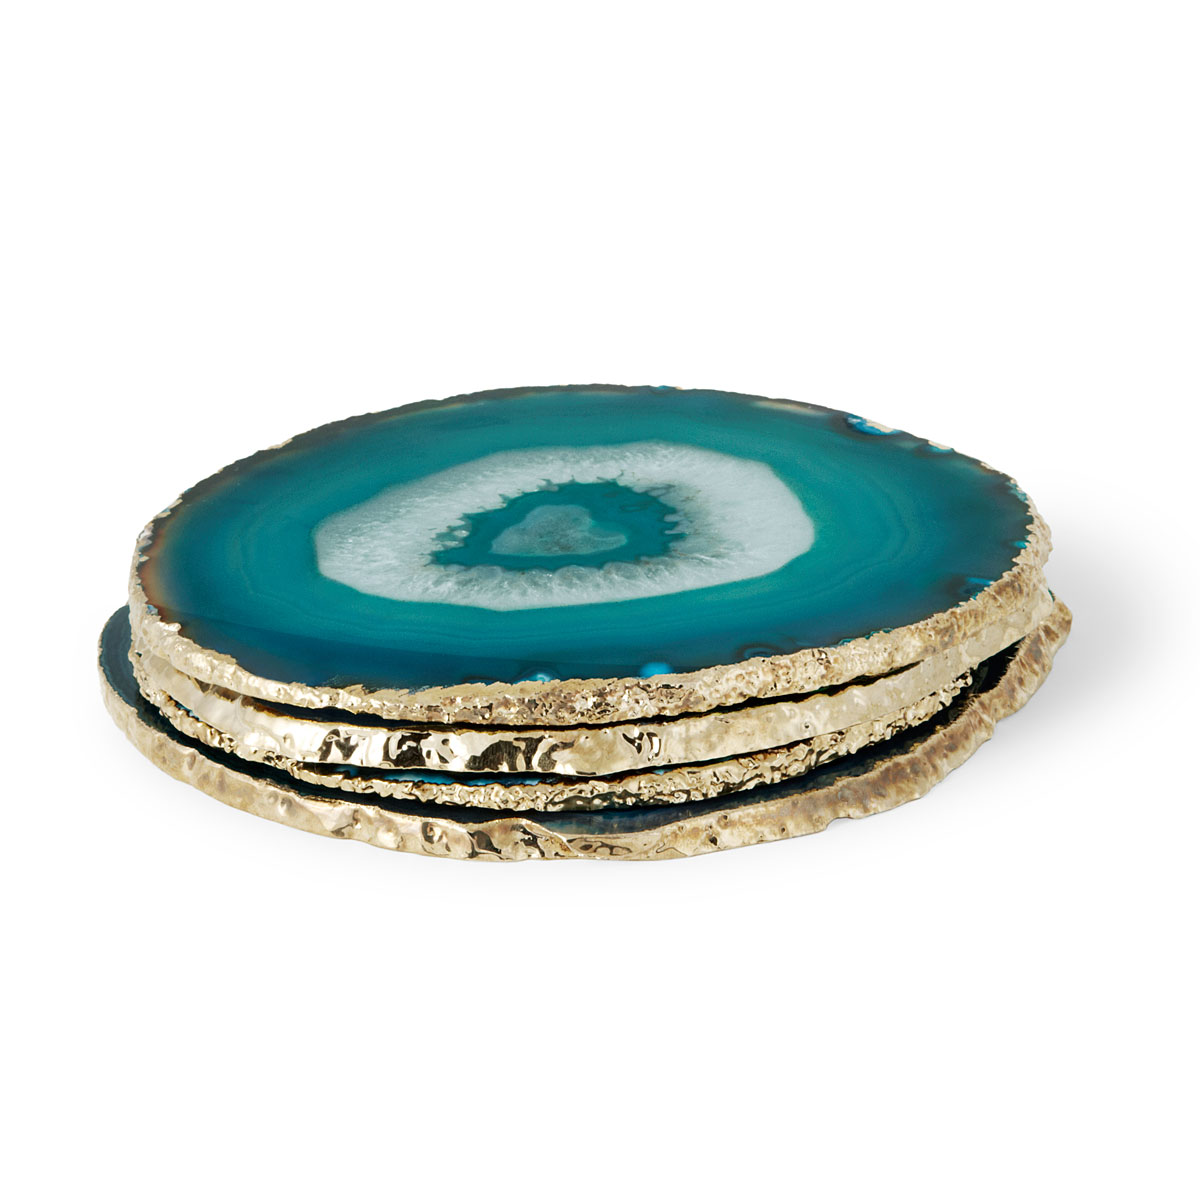 Aerin Agate Coasters, Green Set of Four